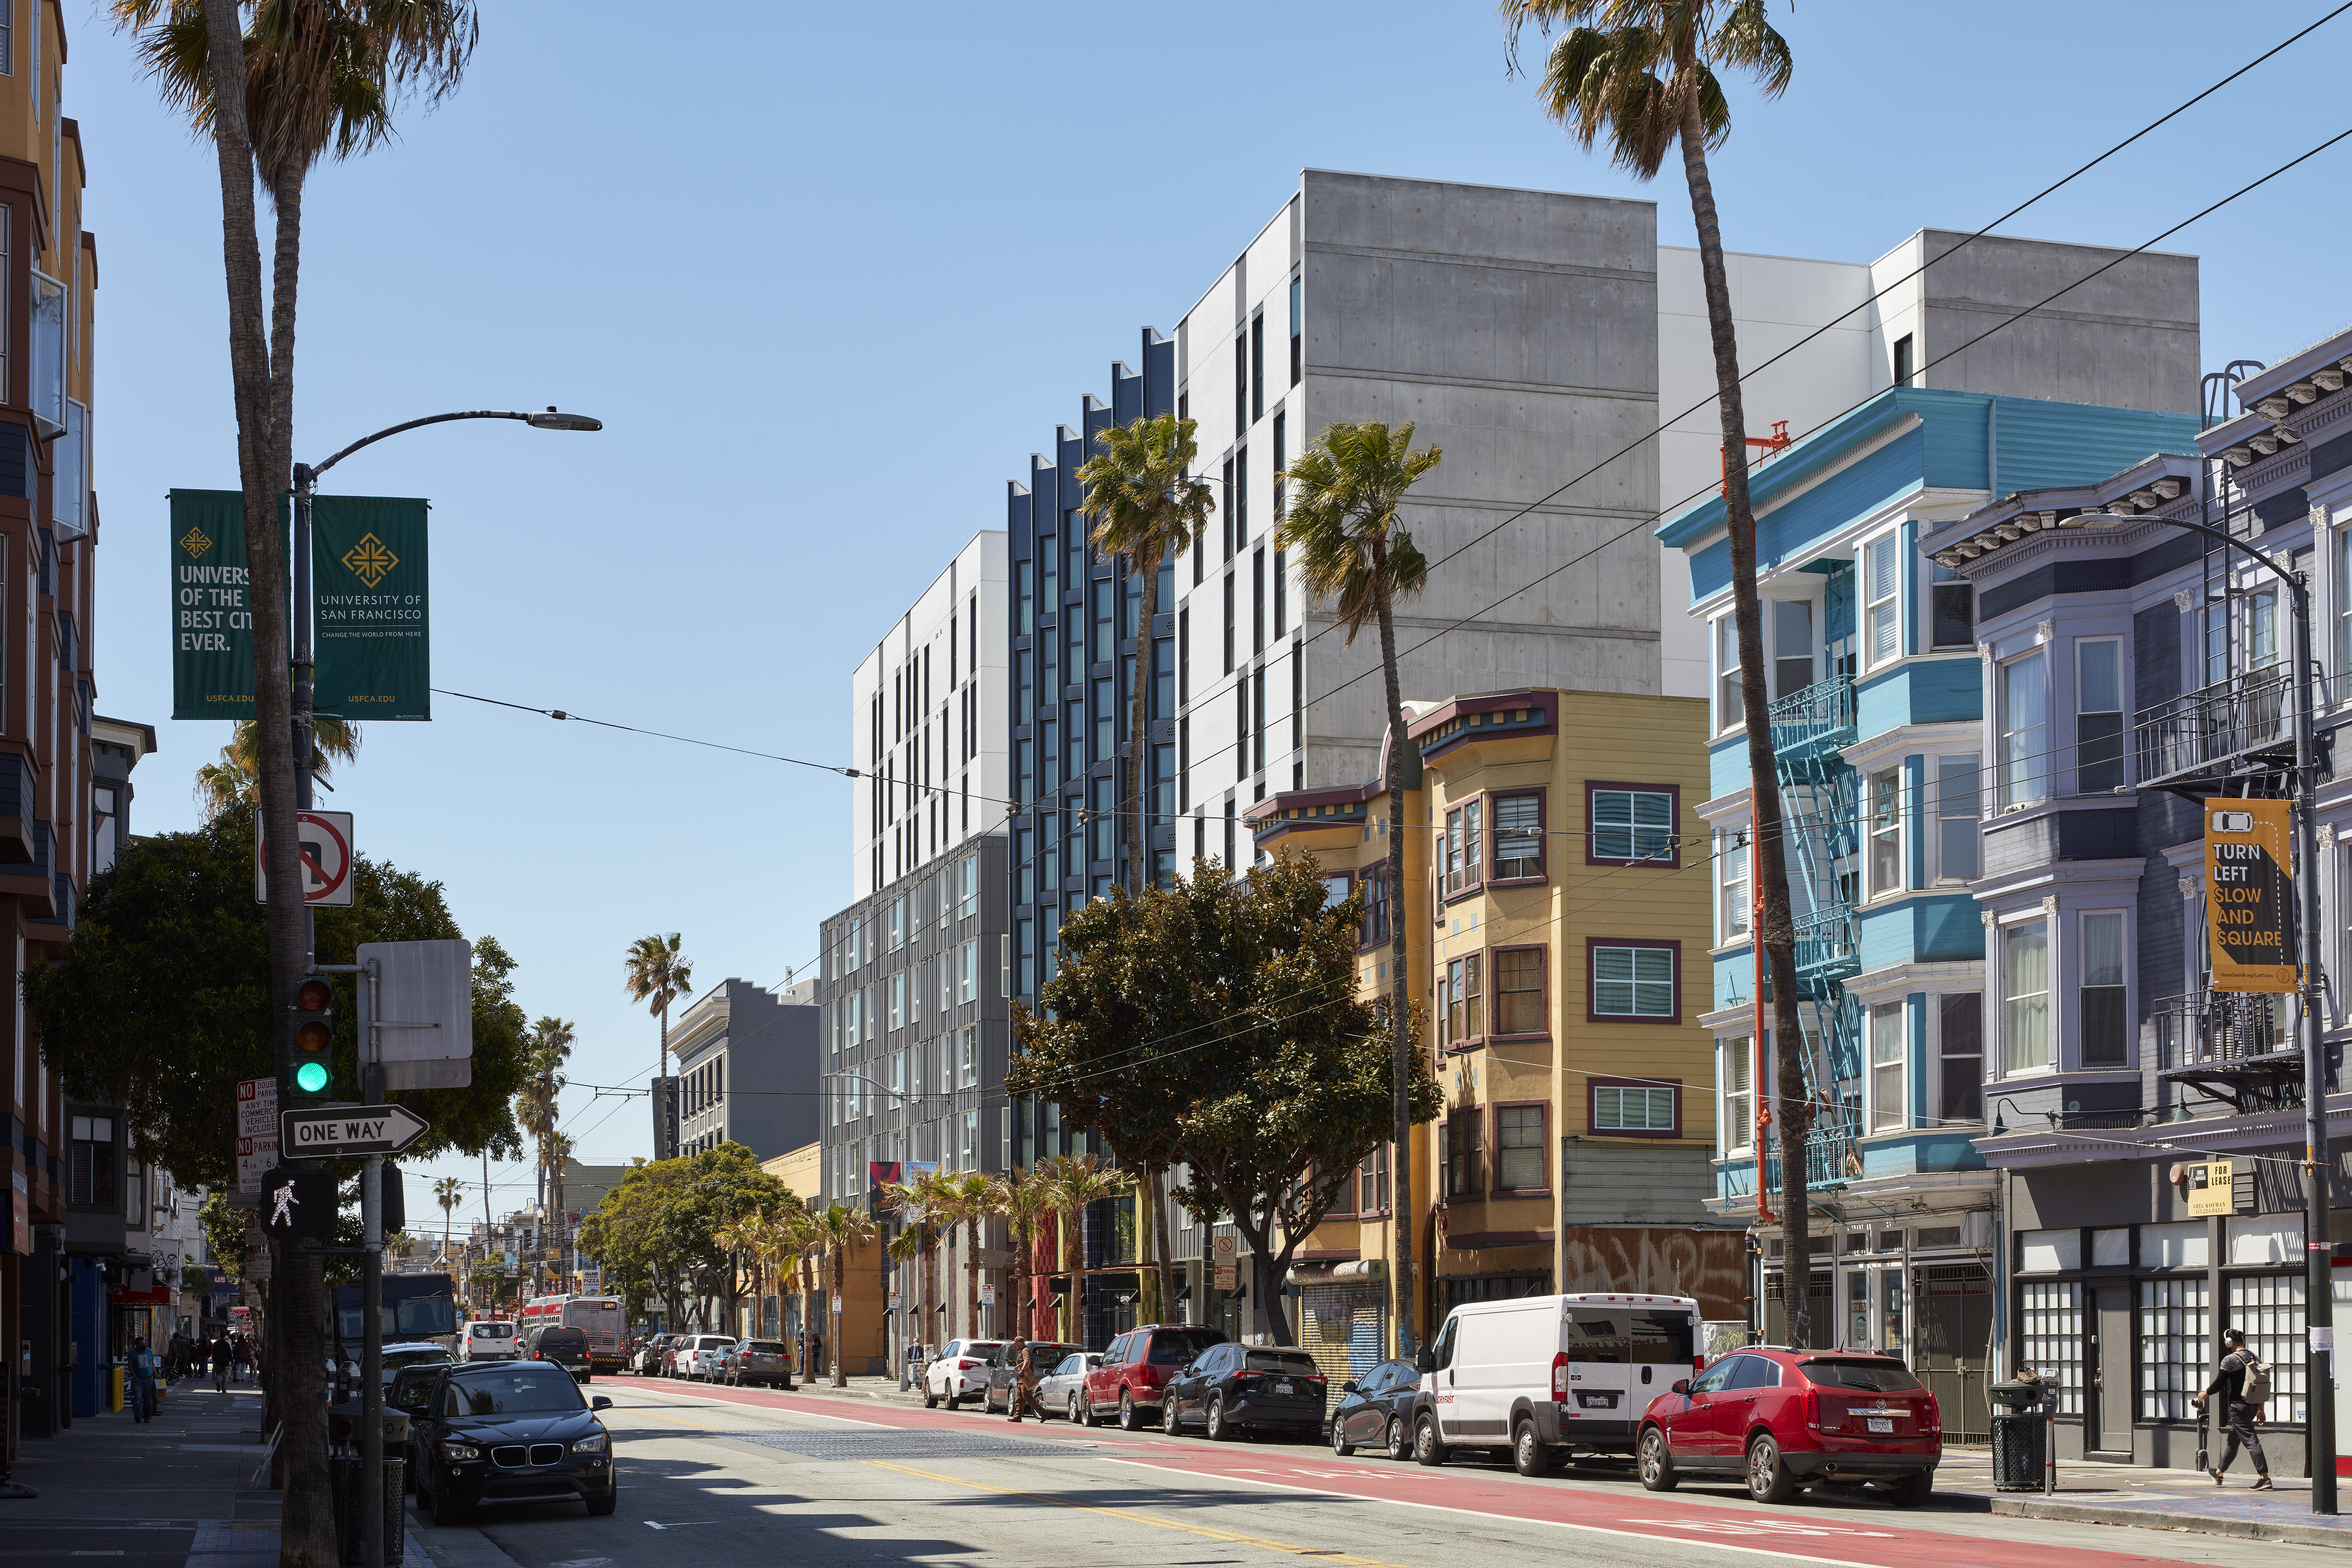 Street view of La Fénix at 1950, affordable housing in the mission district of San Francisco.